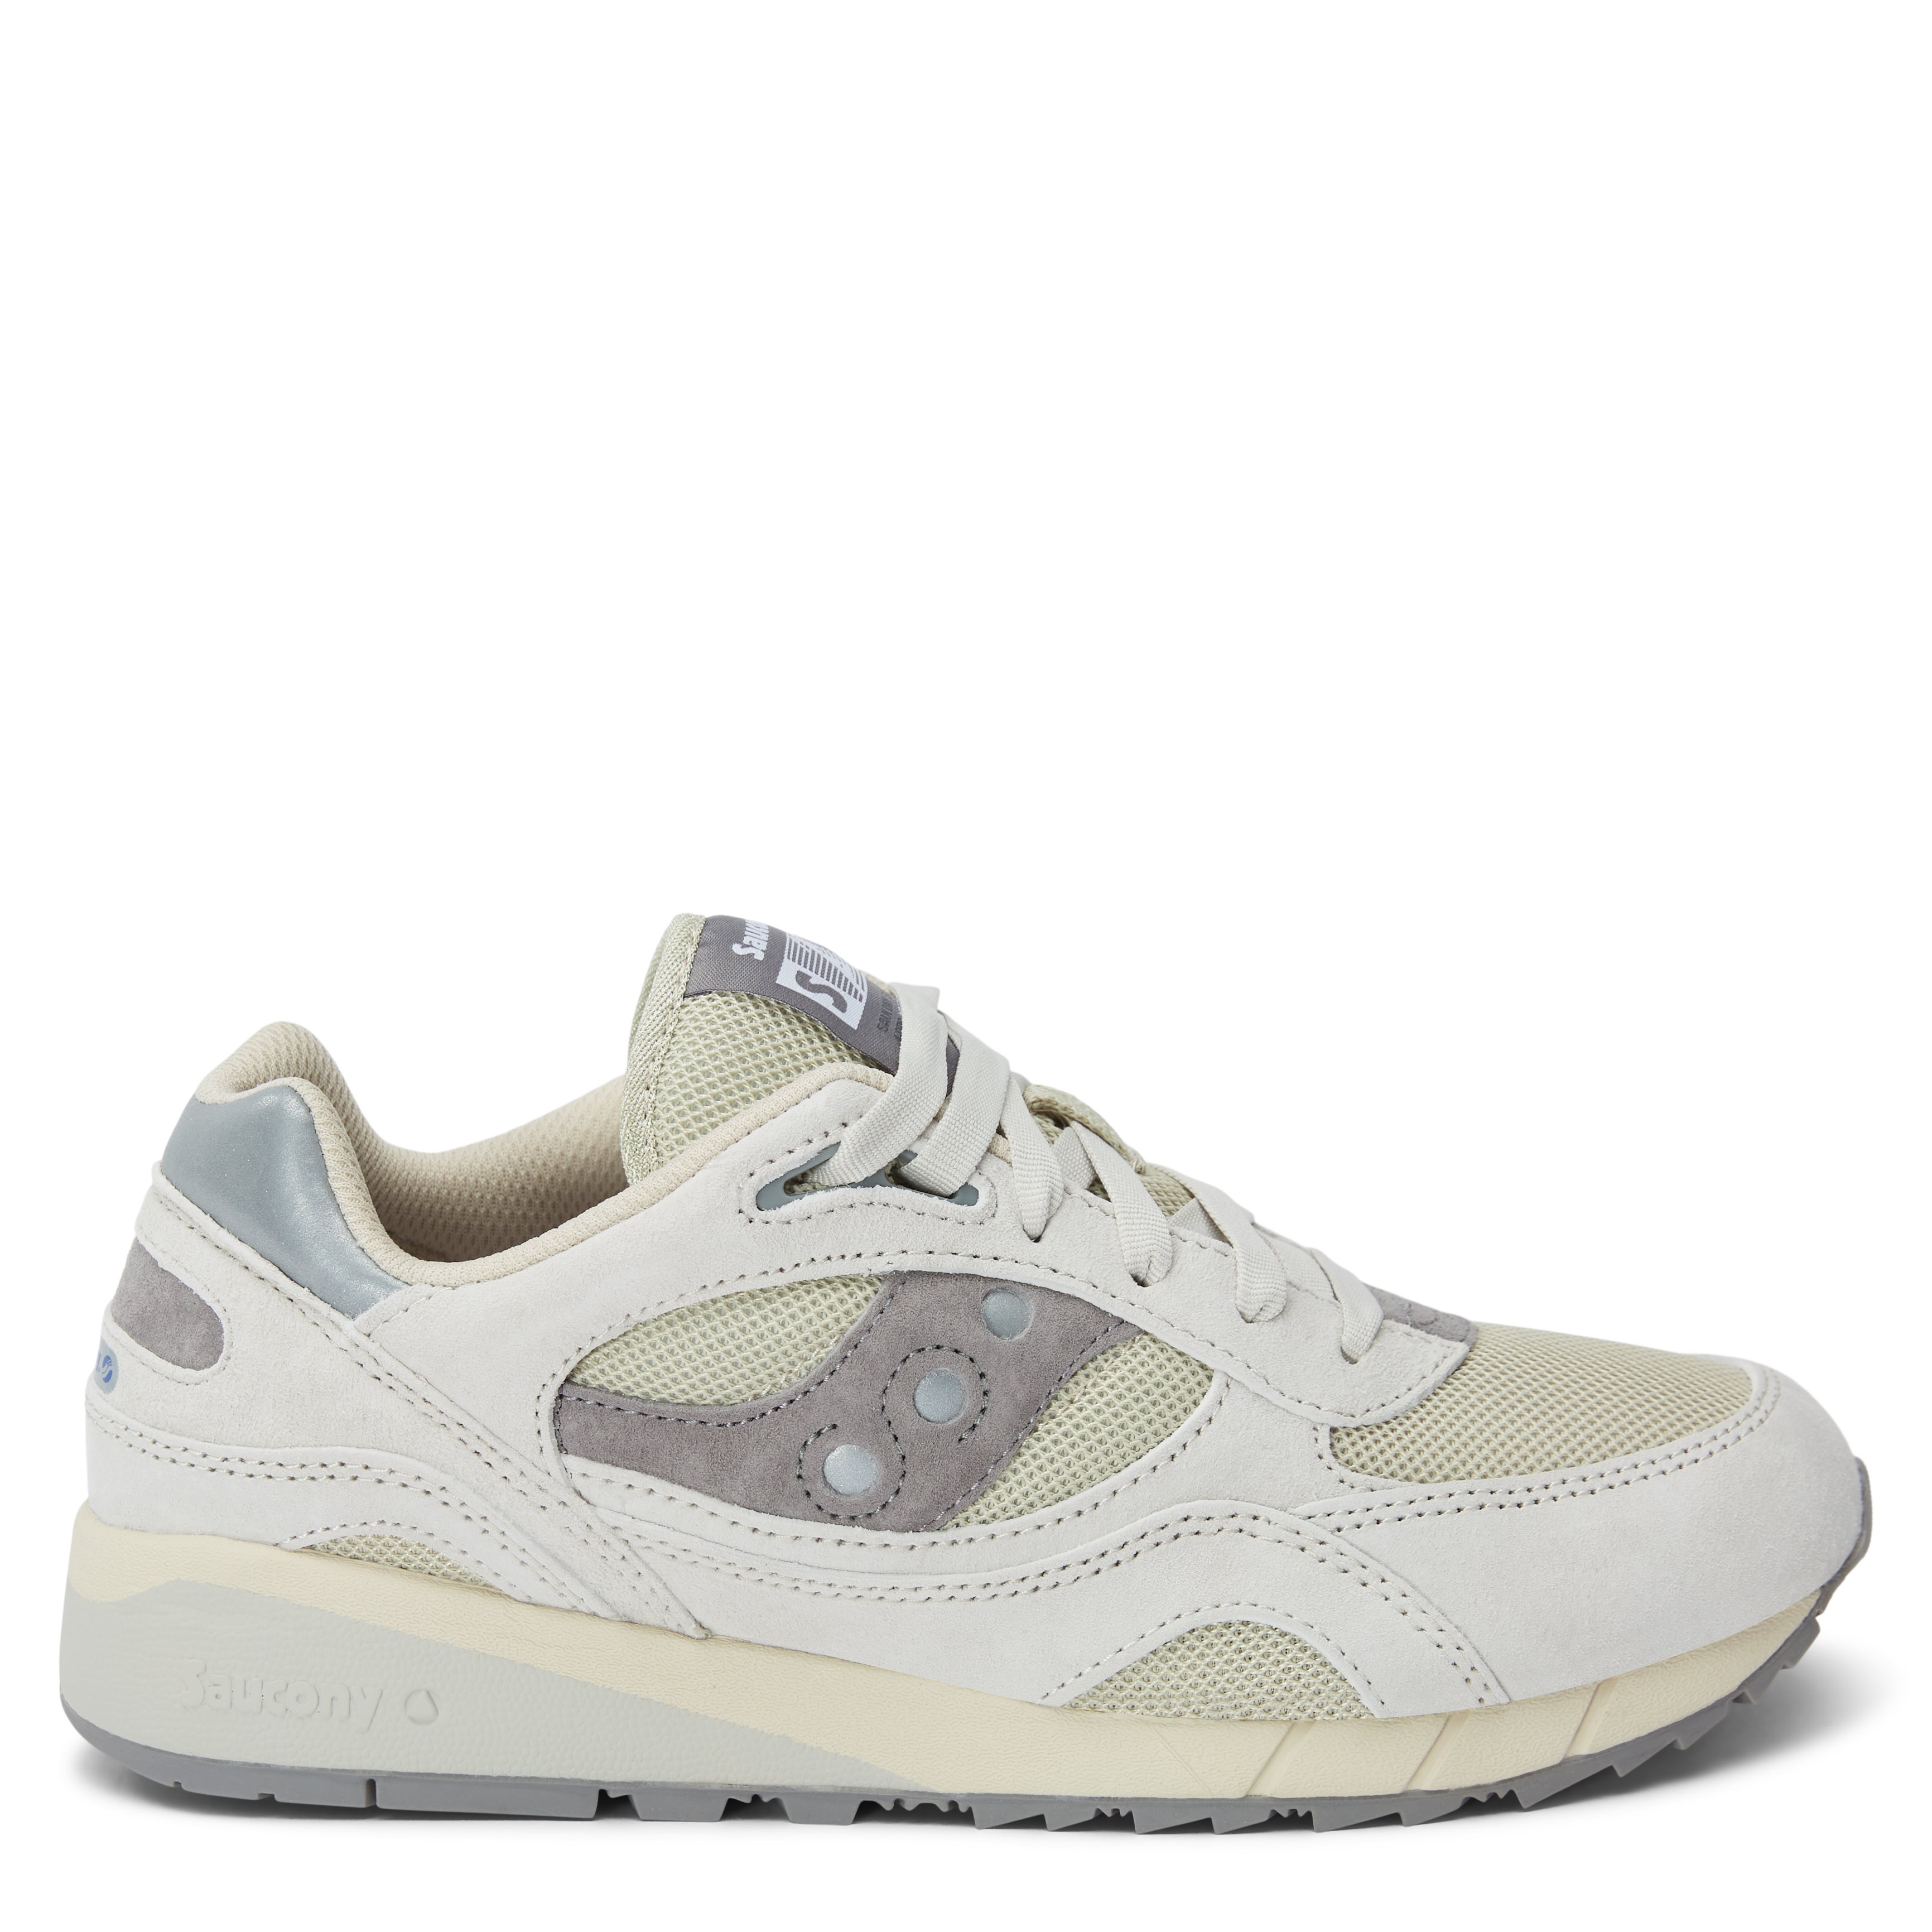 Saucony Shoes SHADOW 6000 S70571-2 Sand